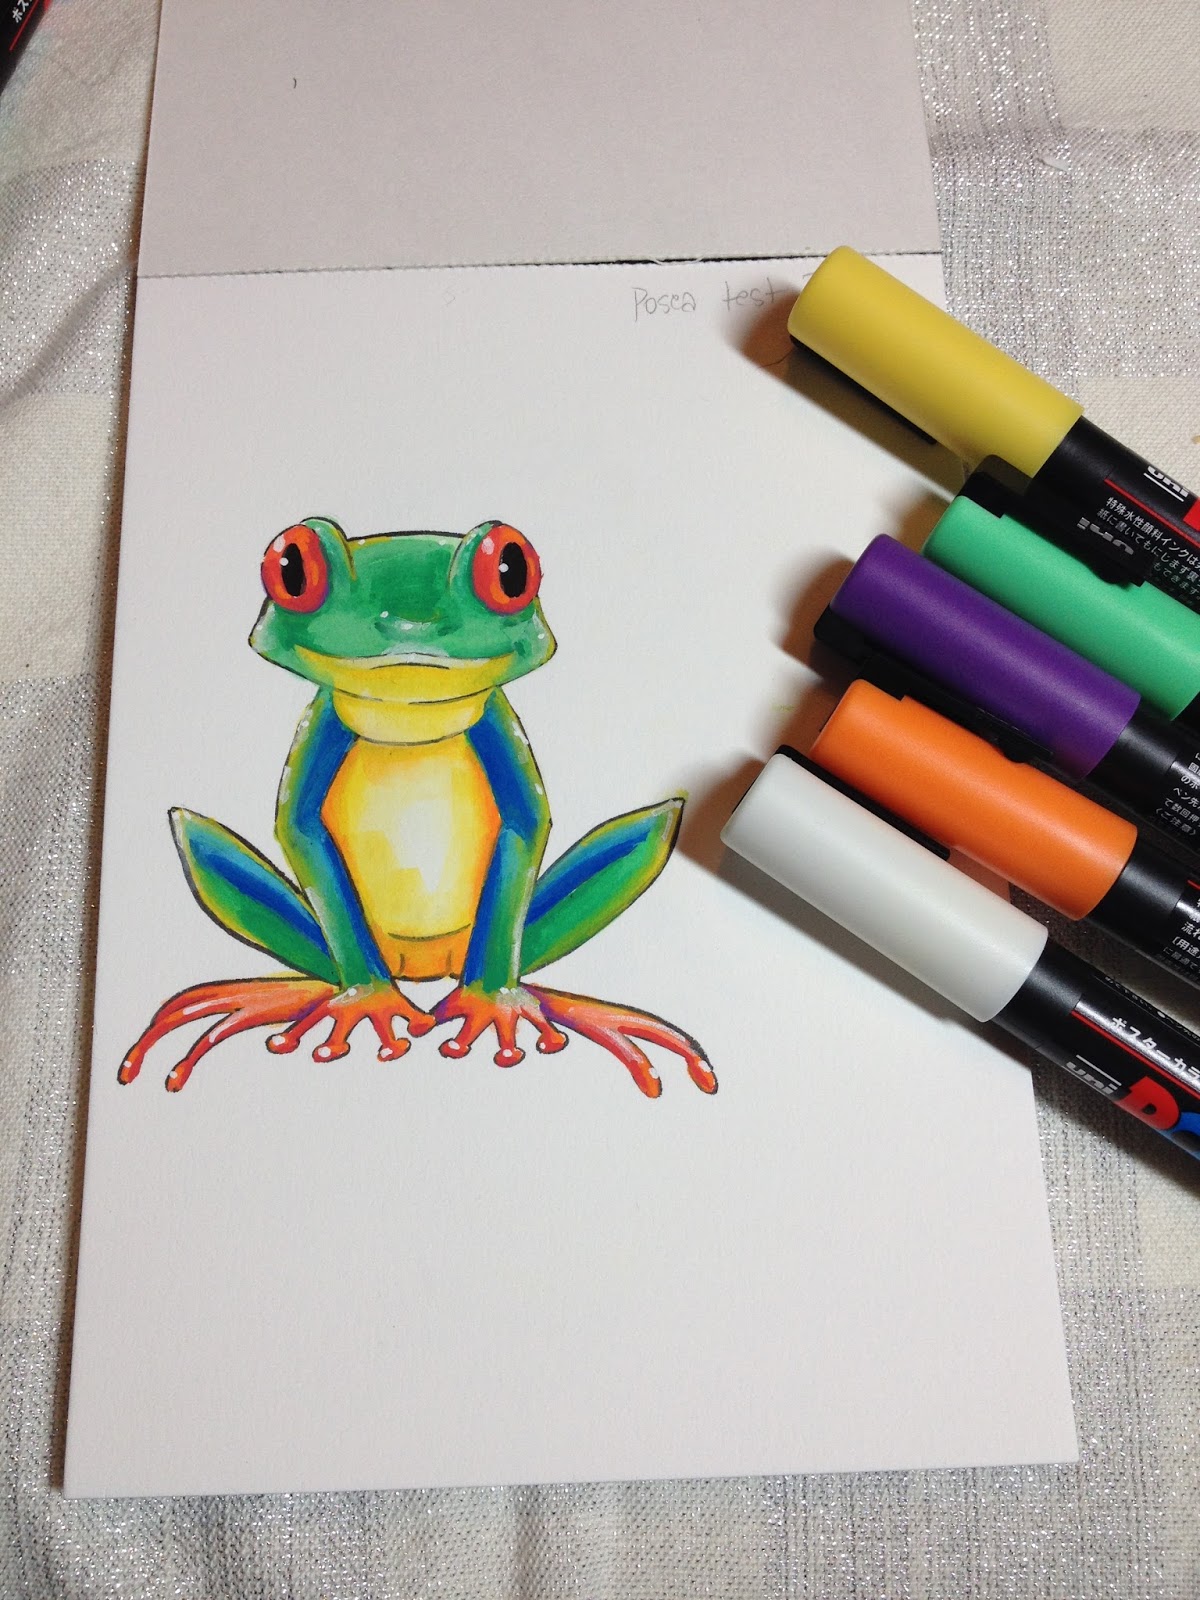 Artistic Blog - learn how to draw with colored pencils: Posca Markers -  Review